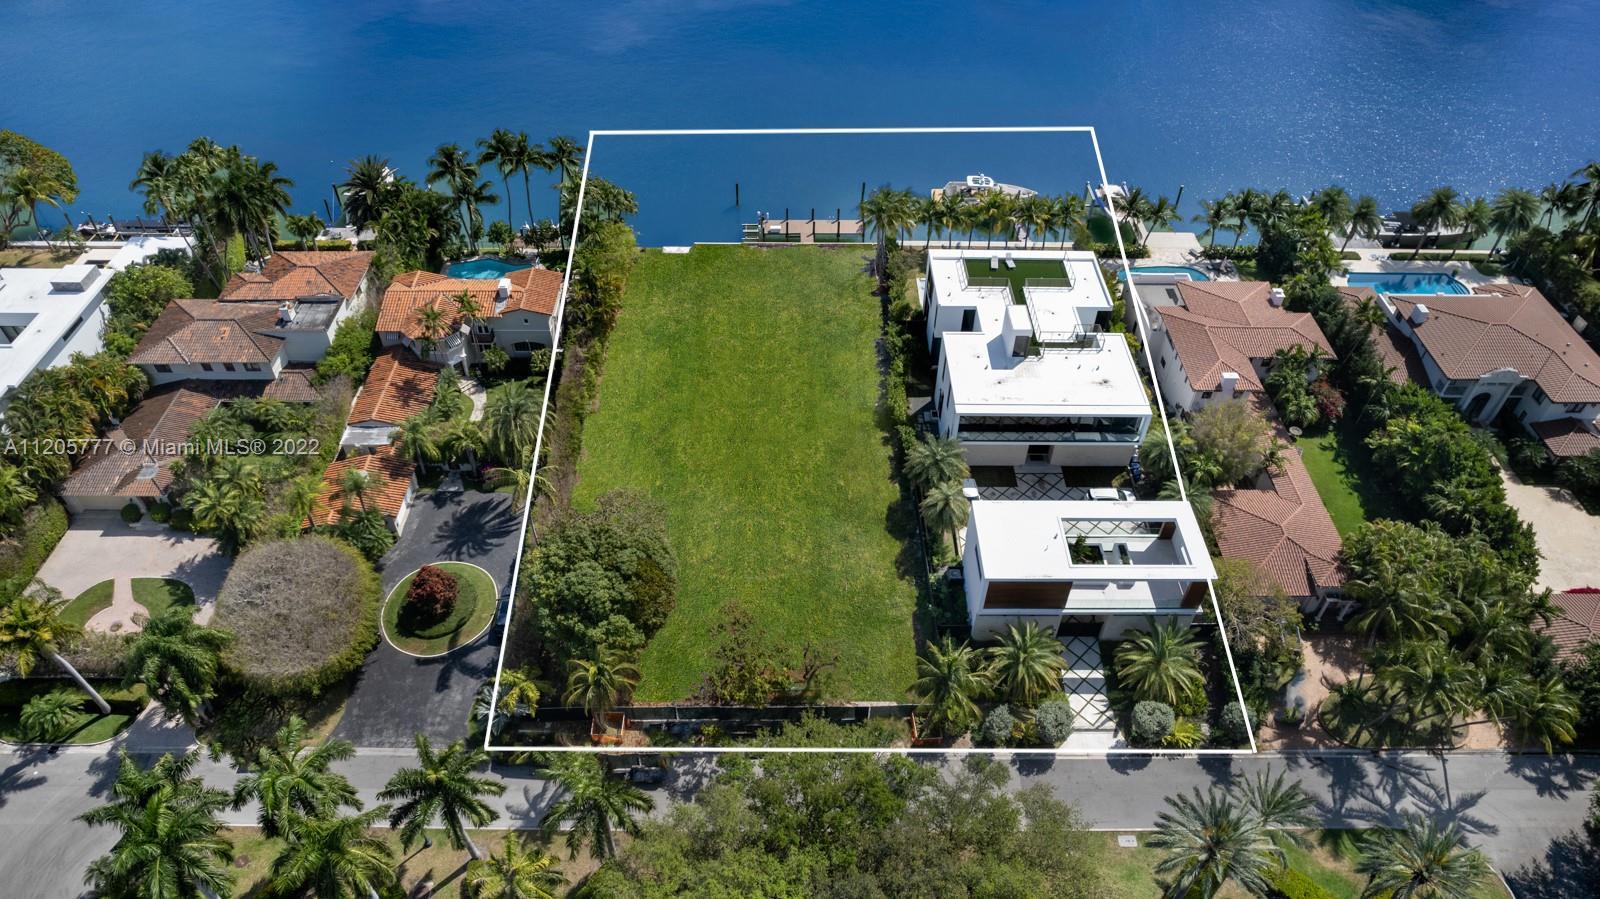 Step Inside With Me! Own a COMPOUND on gated Allison Island. Combined for an unheard of 37,800 SF of